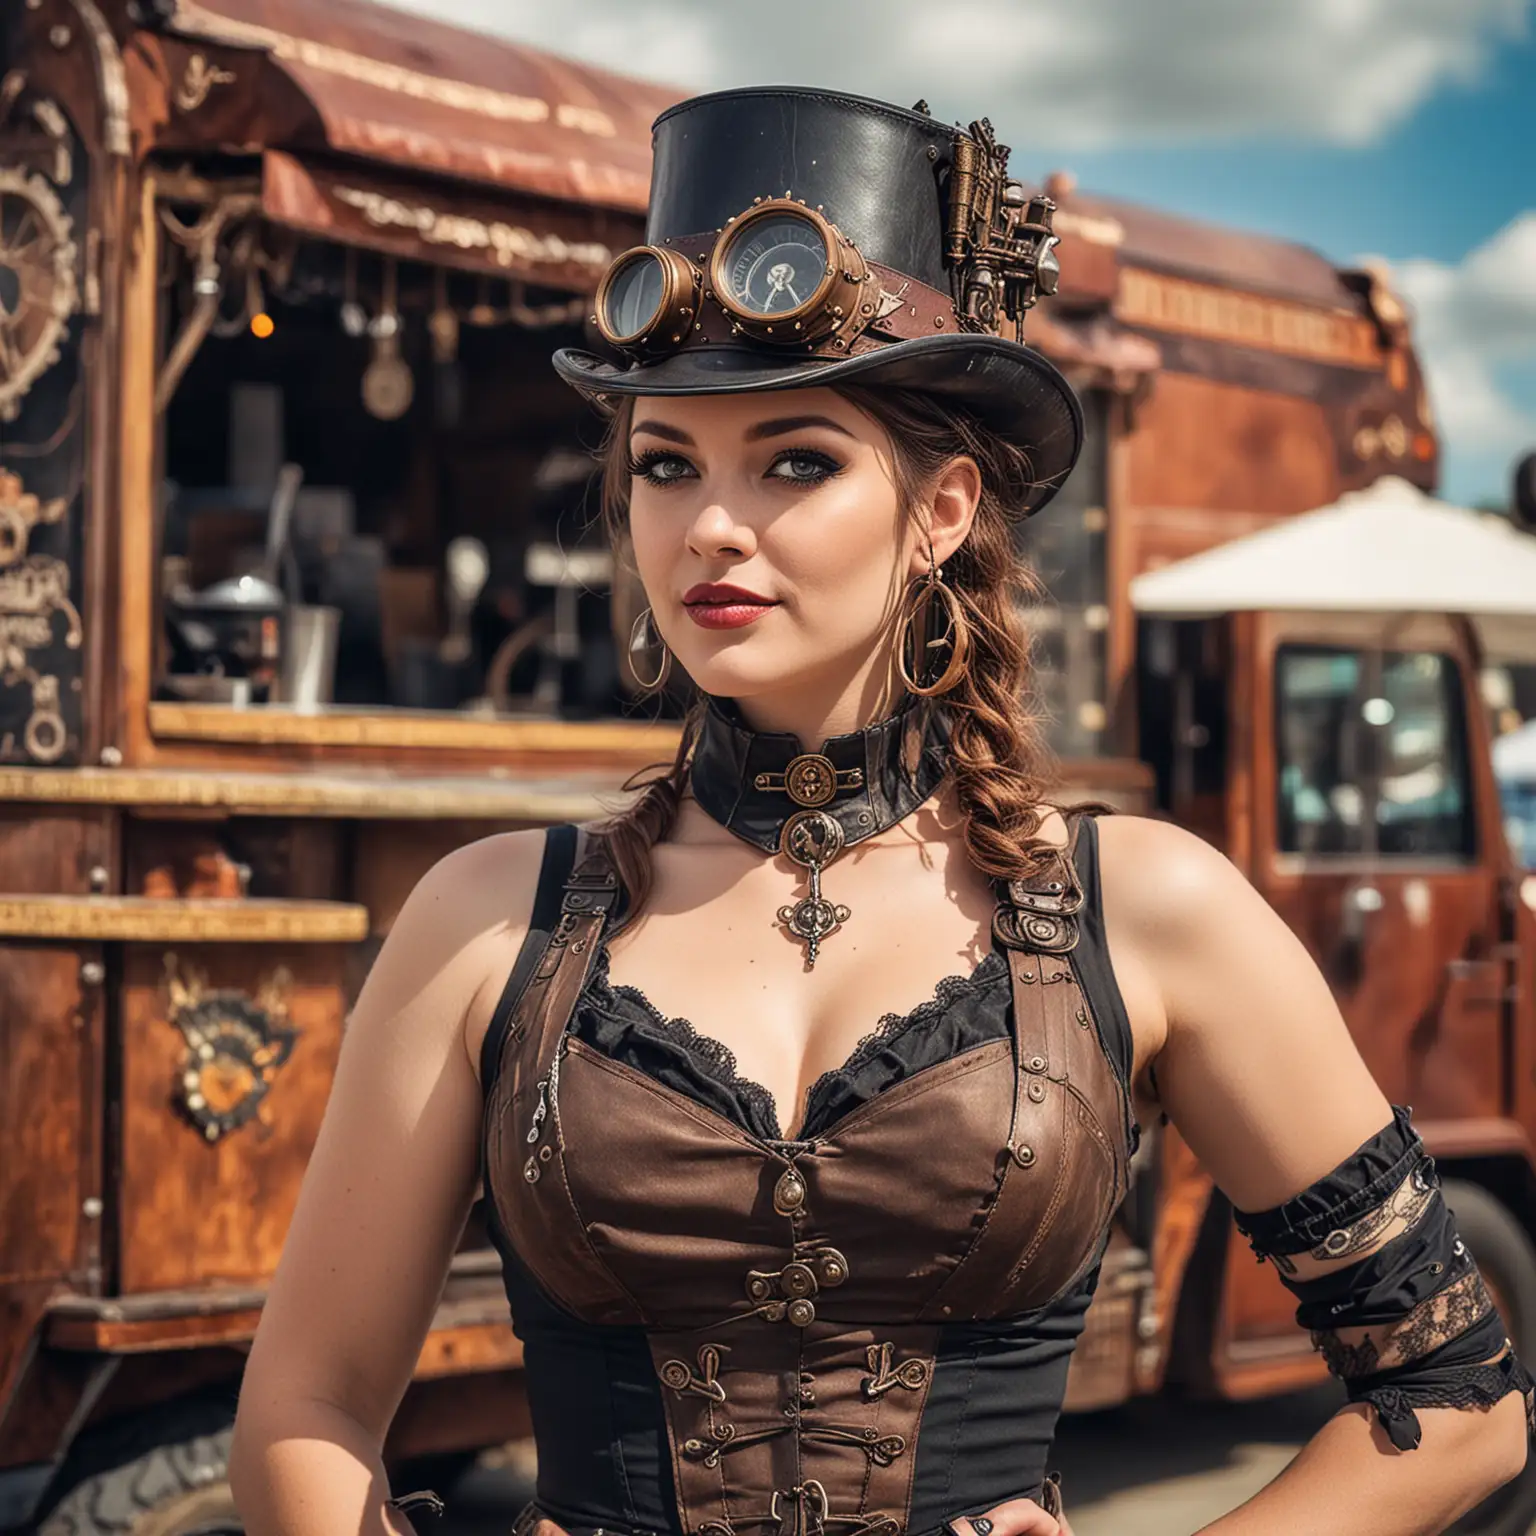 Steampunk Woman at Food Truck Rally Victorian Style at Fairgrounds